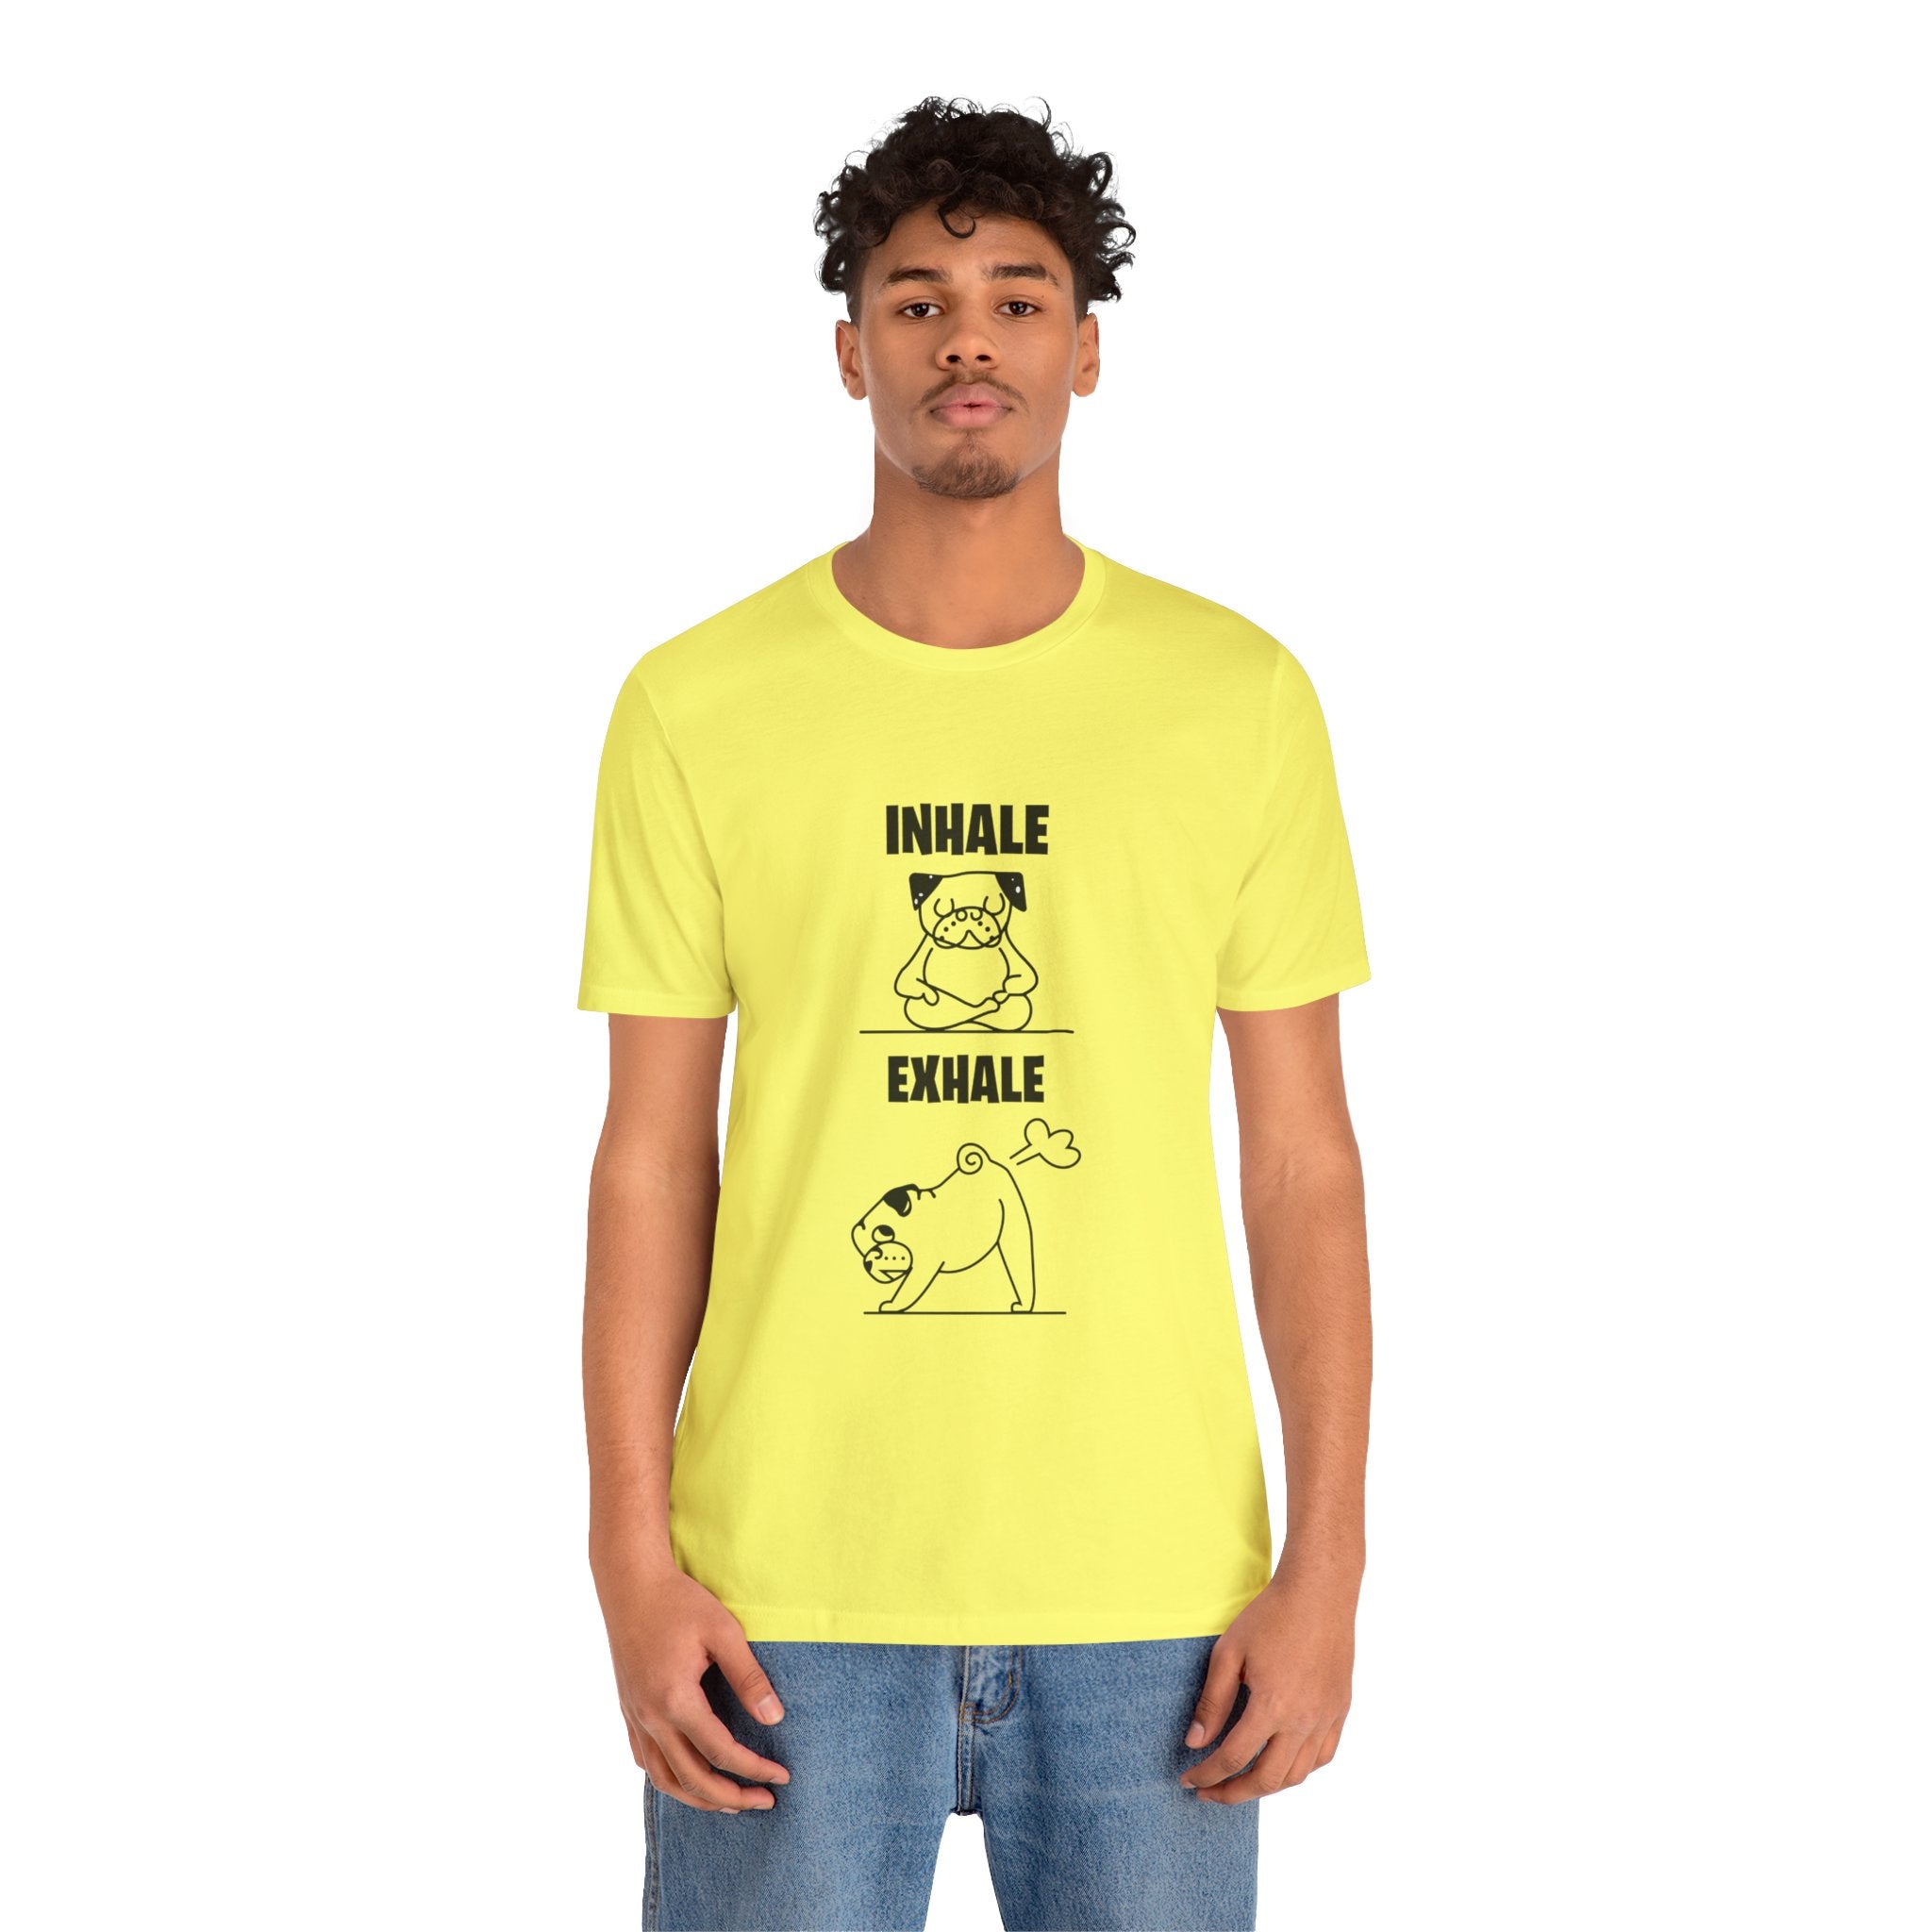 A young man wearing a yellow unisex Dog Funny T shirt featuring a meditating dog and a cat print, paired with blue jeans, standing against a white background.